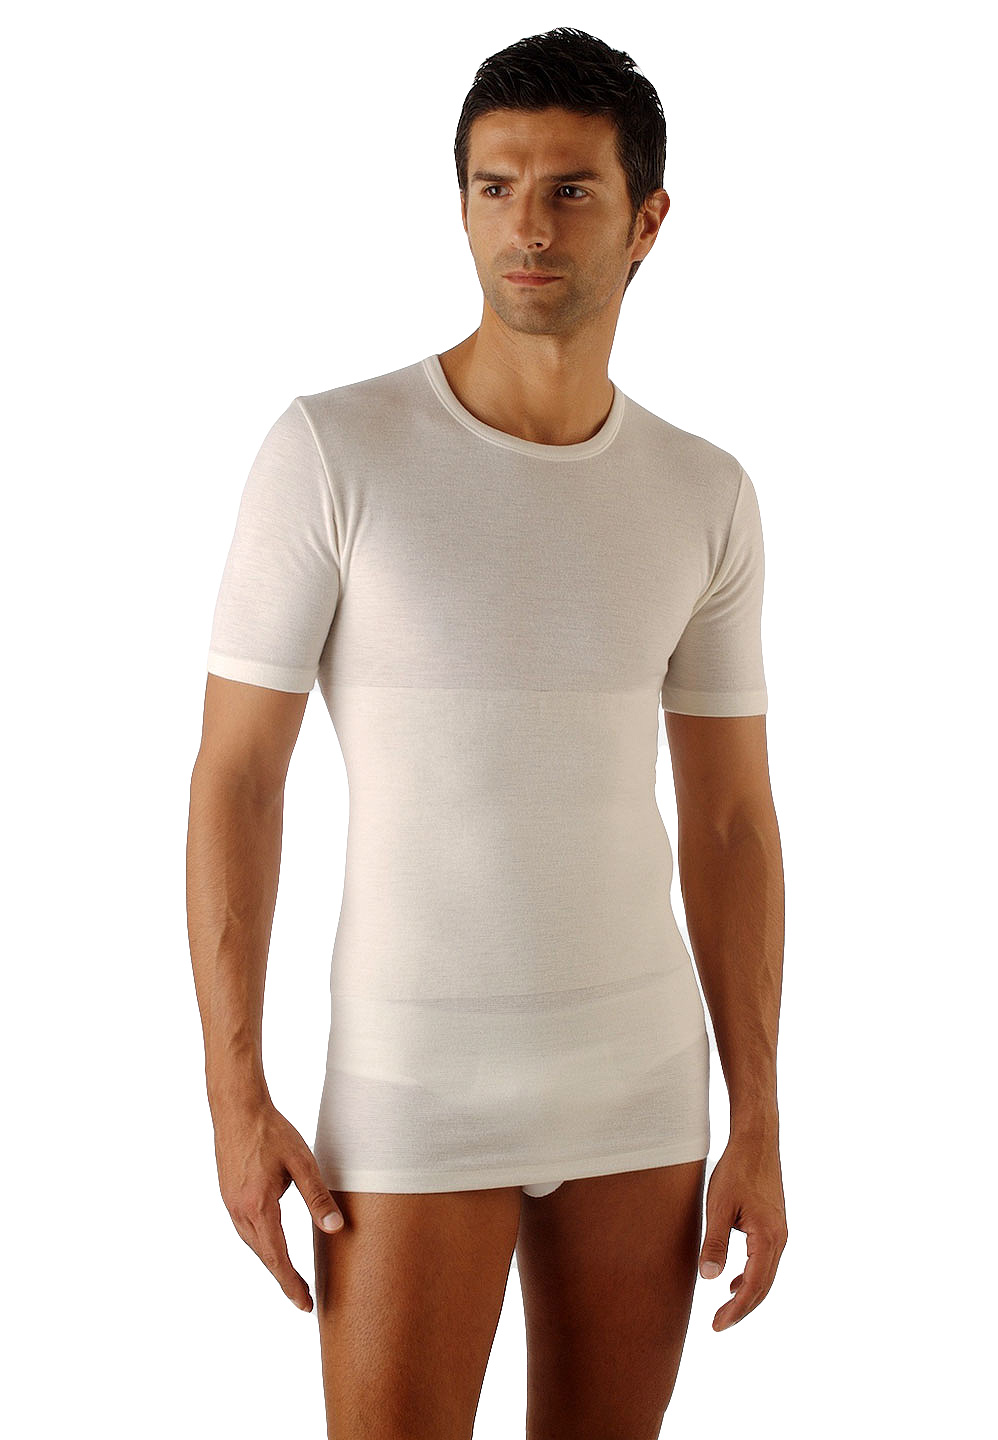 Men's merino wool and cotton short sleeve thermal vest with back support